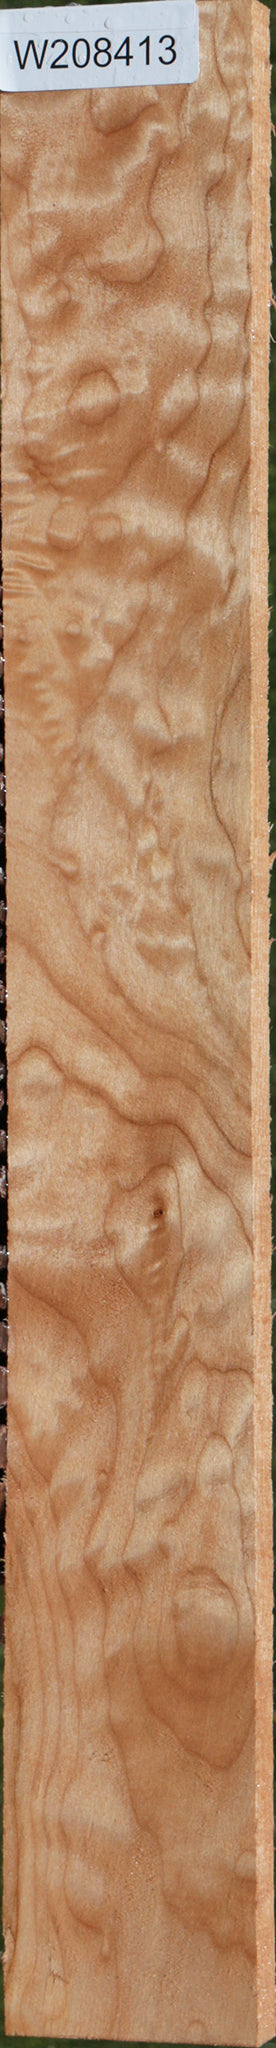 Quilted Maple Lumber